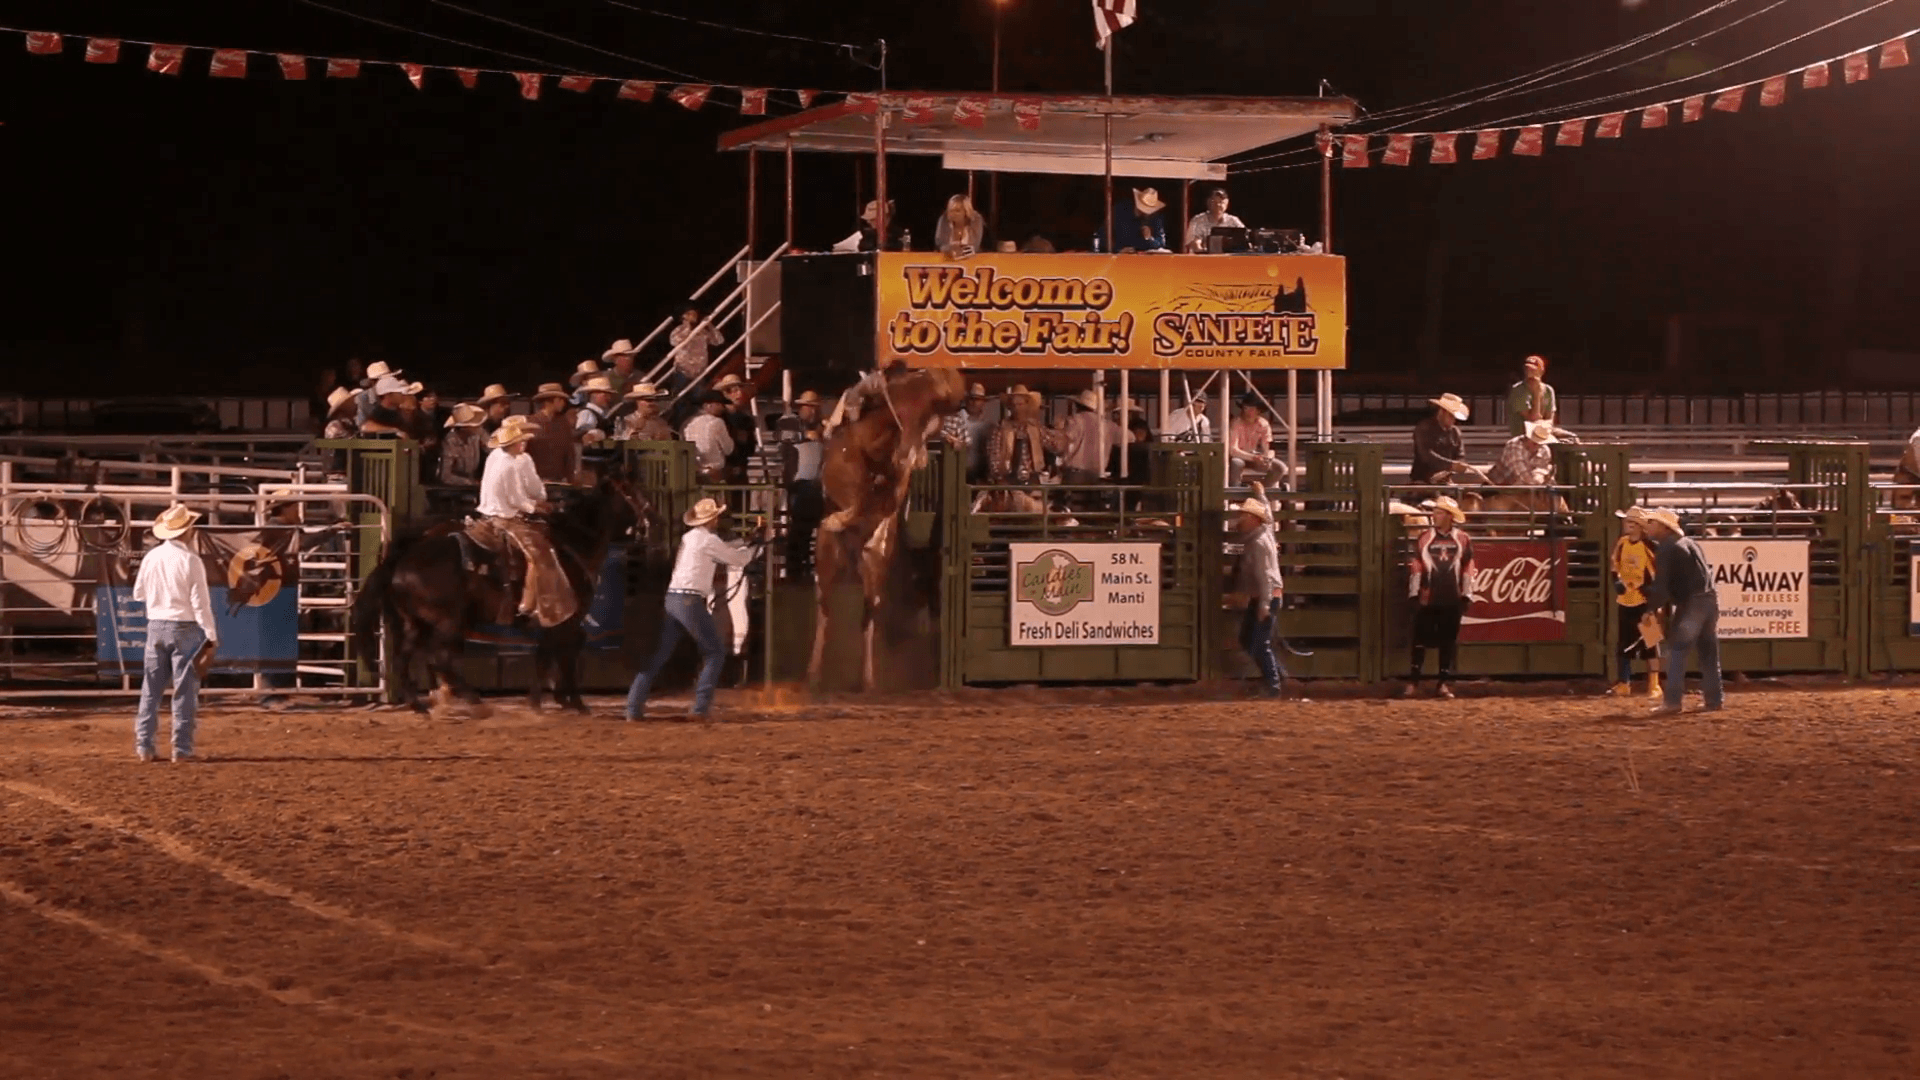 Rodeo saddle bronco horse ride gets rough ride out of chute to score